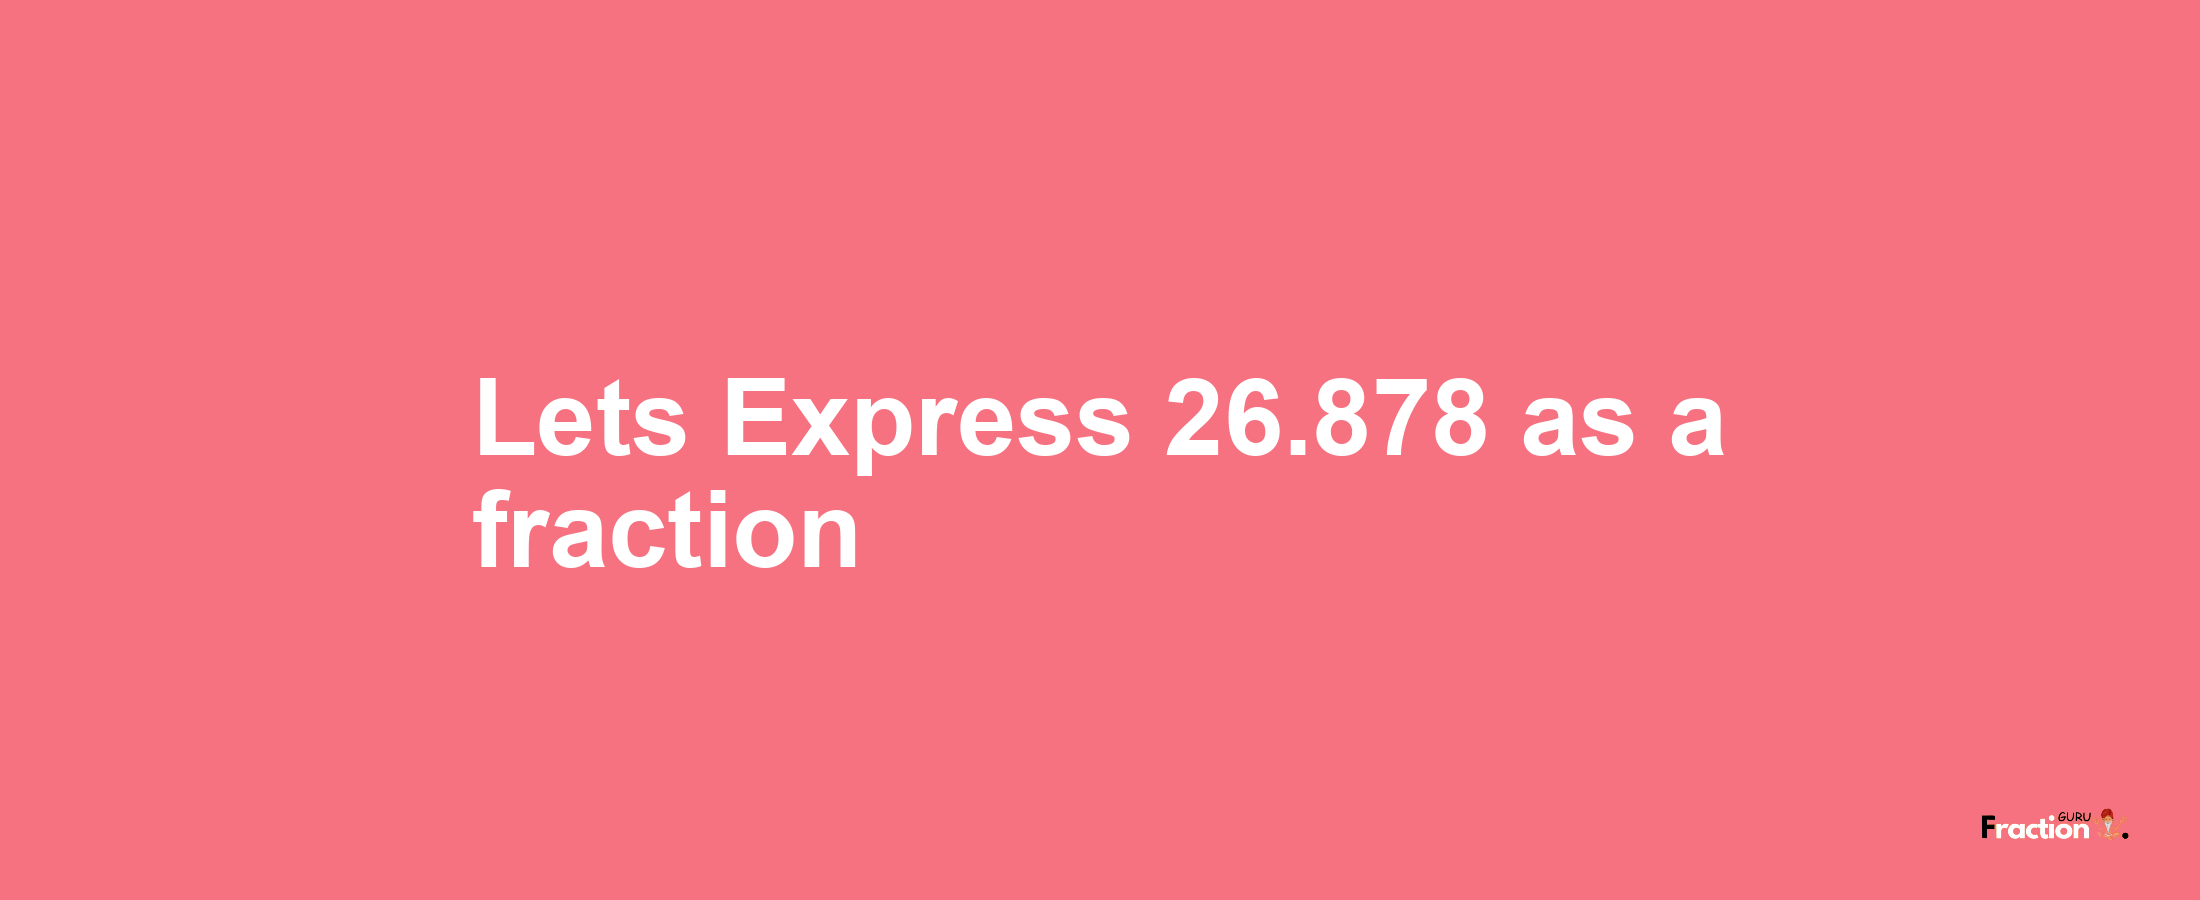 Lets Express 26.878 as afraction